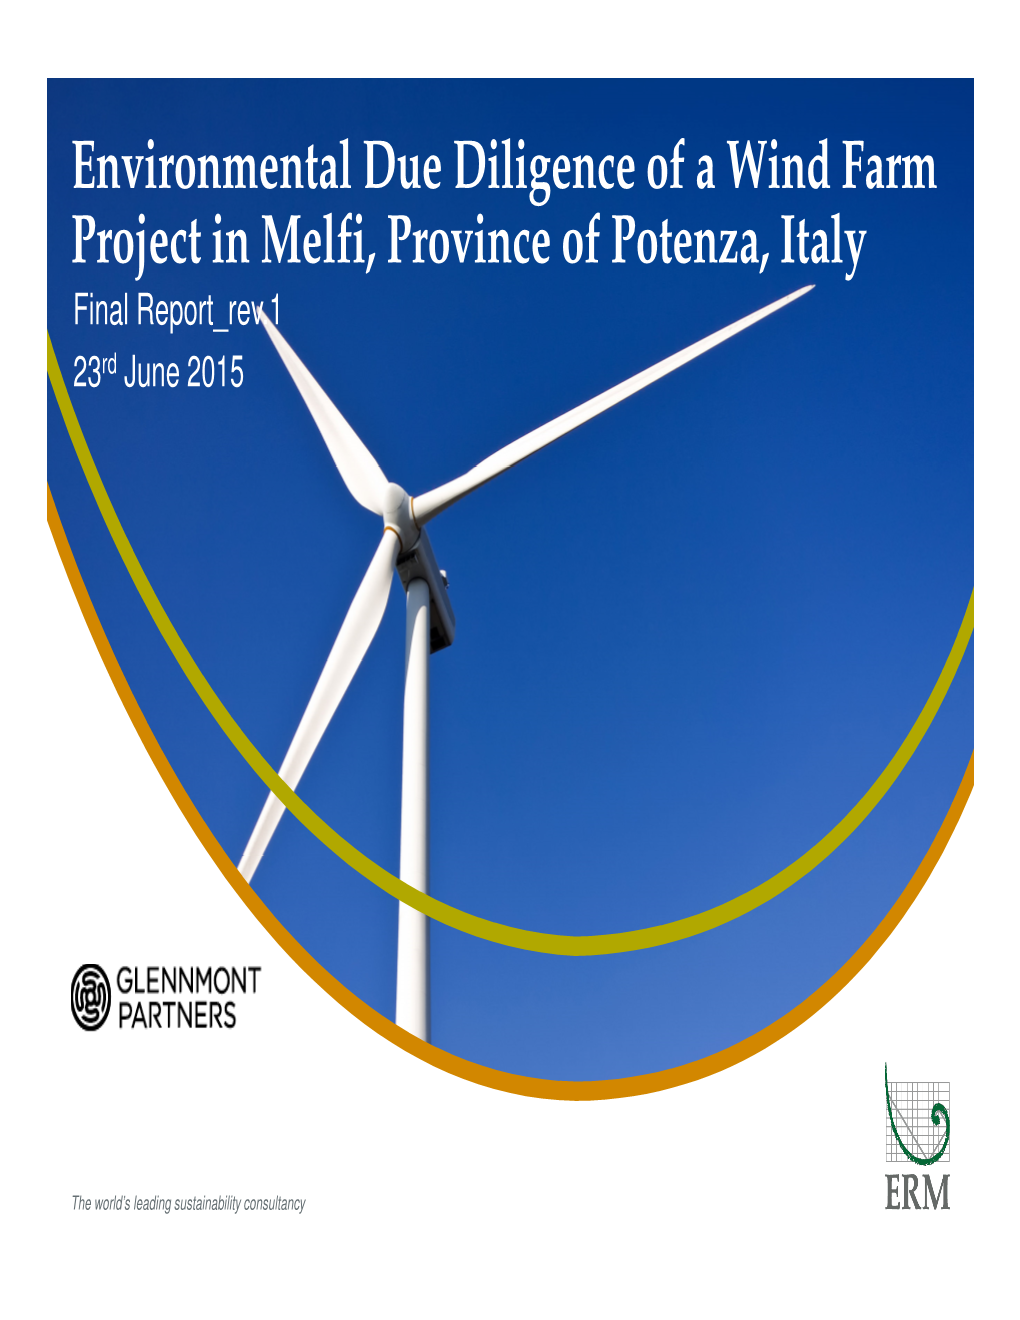 Environmental Due Diligence of a Wind Farm Project in Melfi, Province of Potenza, Italy Final Report Rev.1 23 Rd June 2015